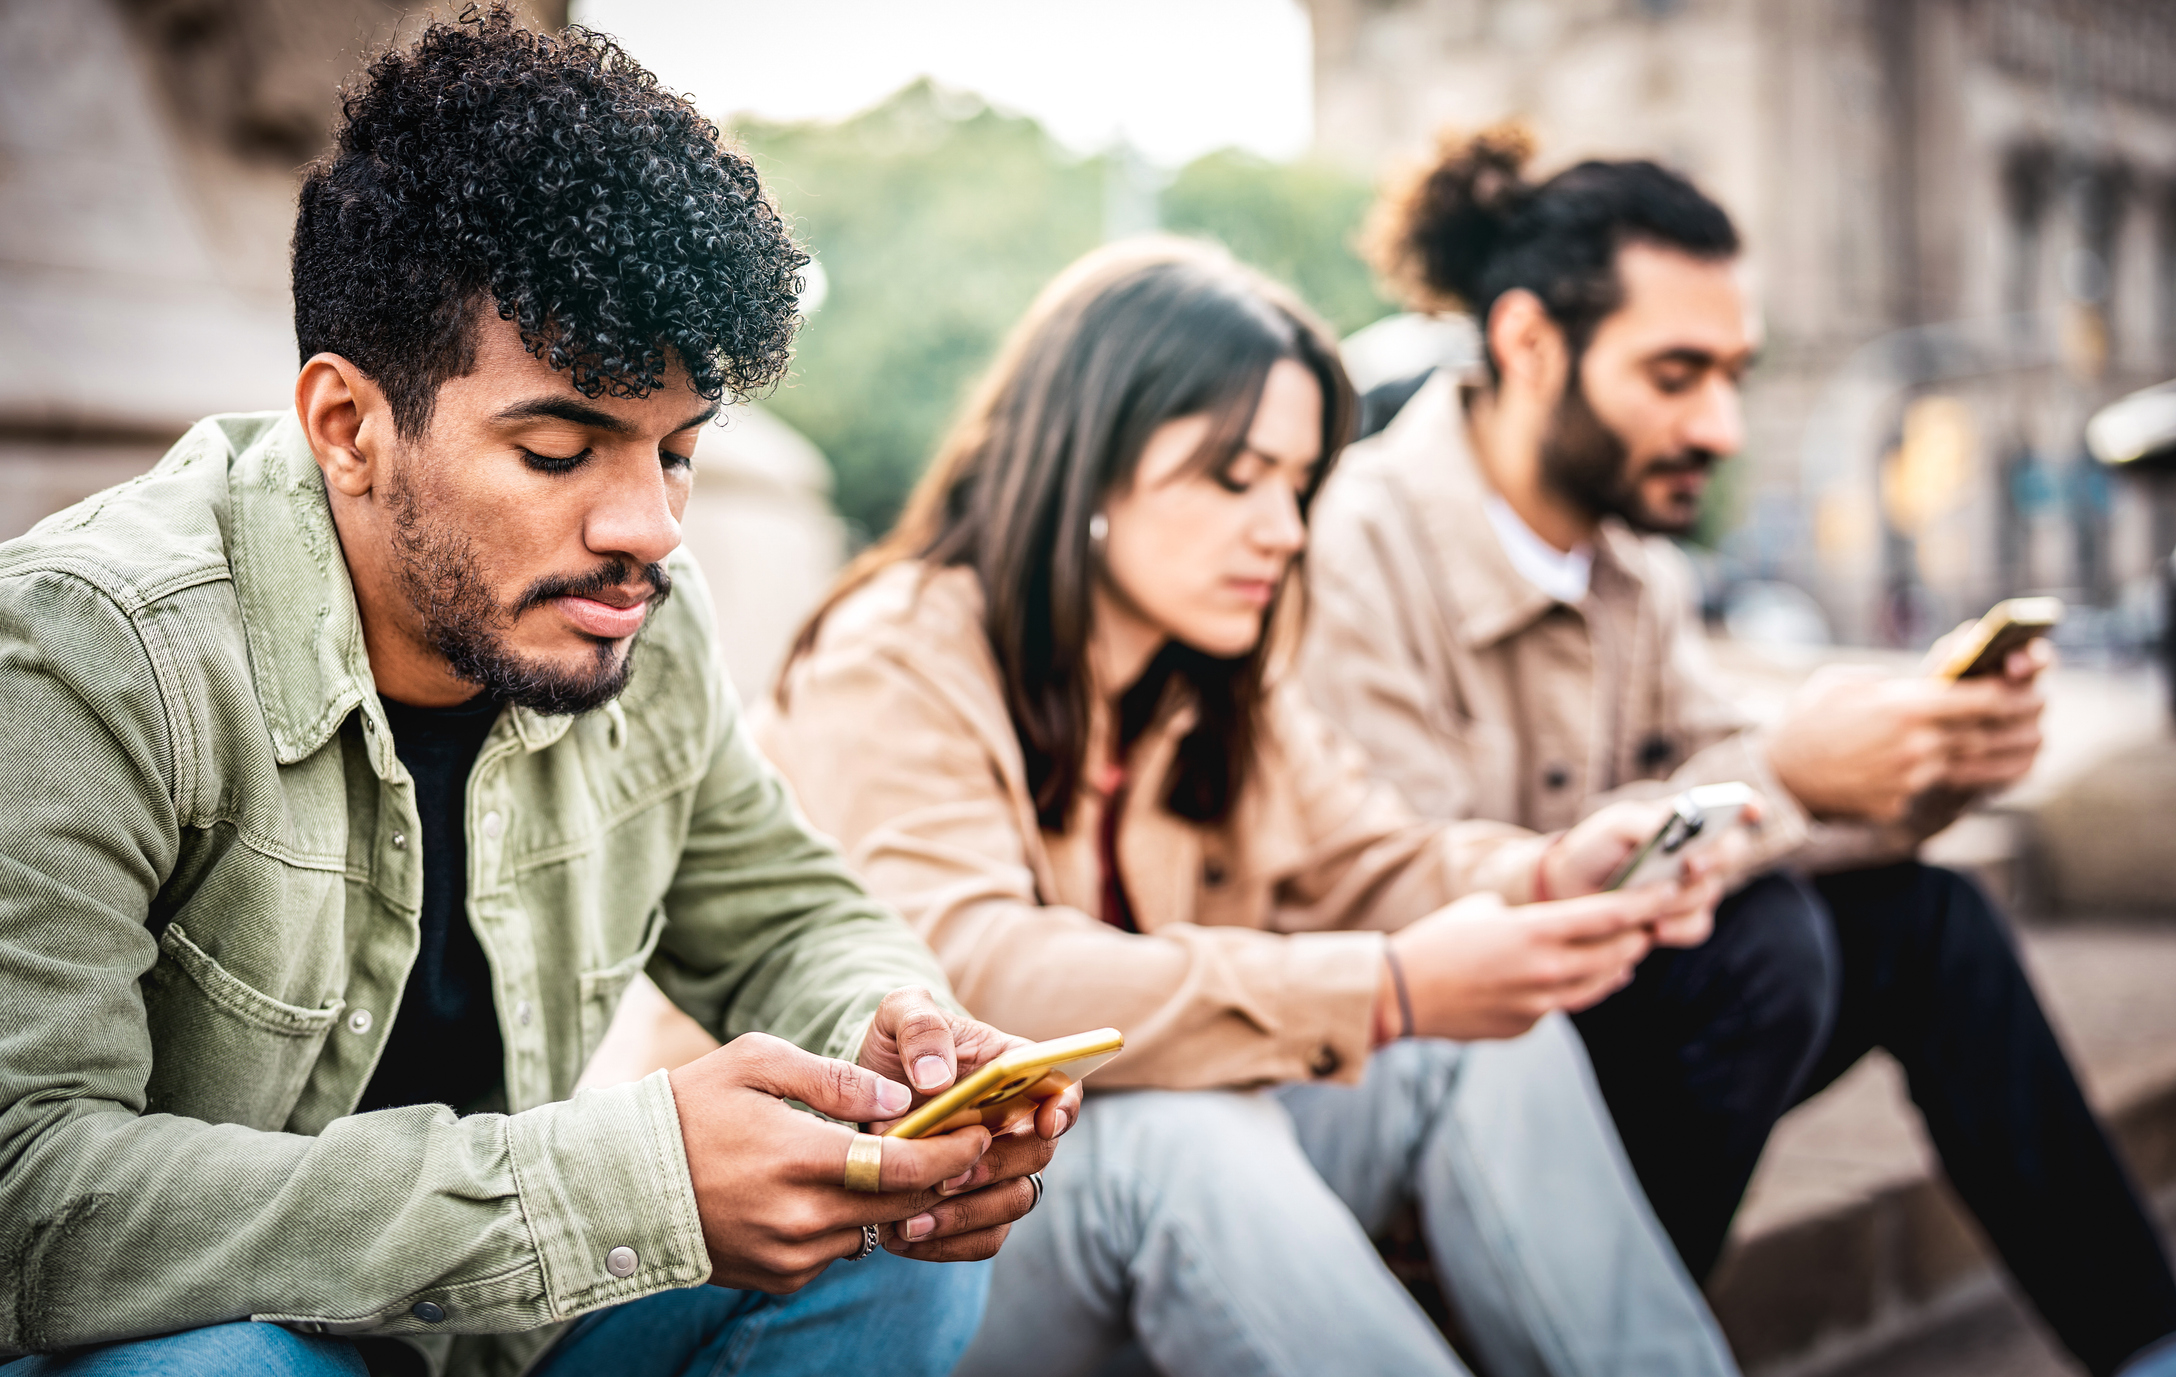 Stock Image of Three People Man Woman Man Sitting Next To One Another and All Looking at Their Phones